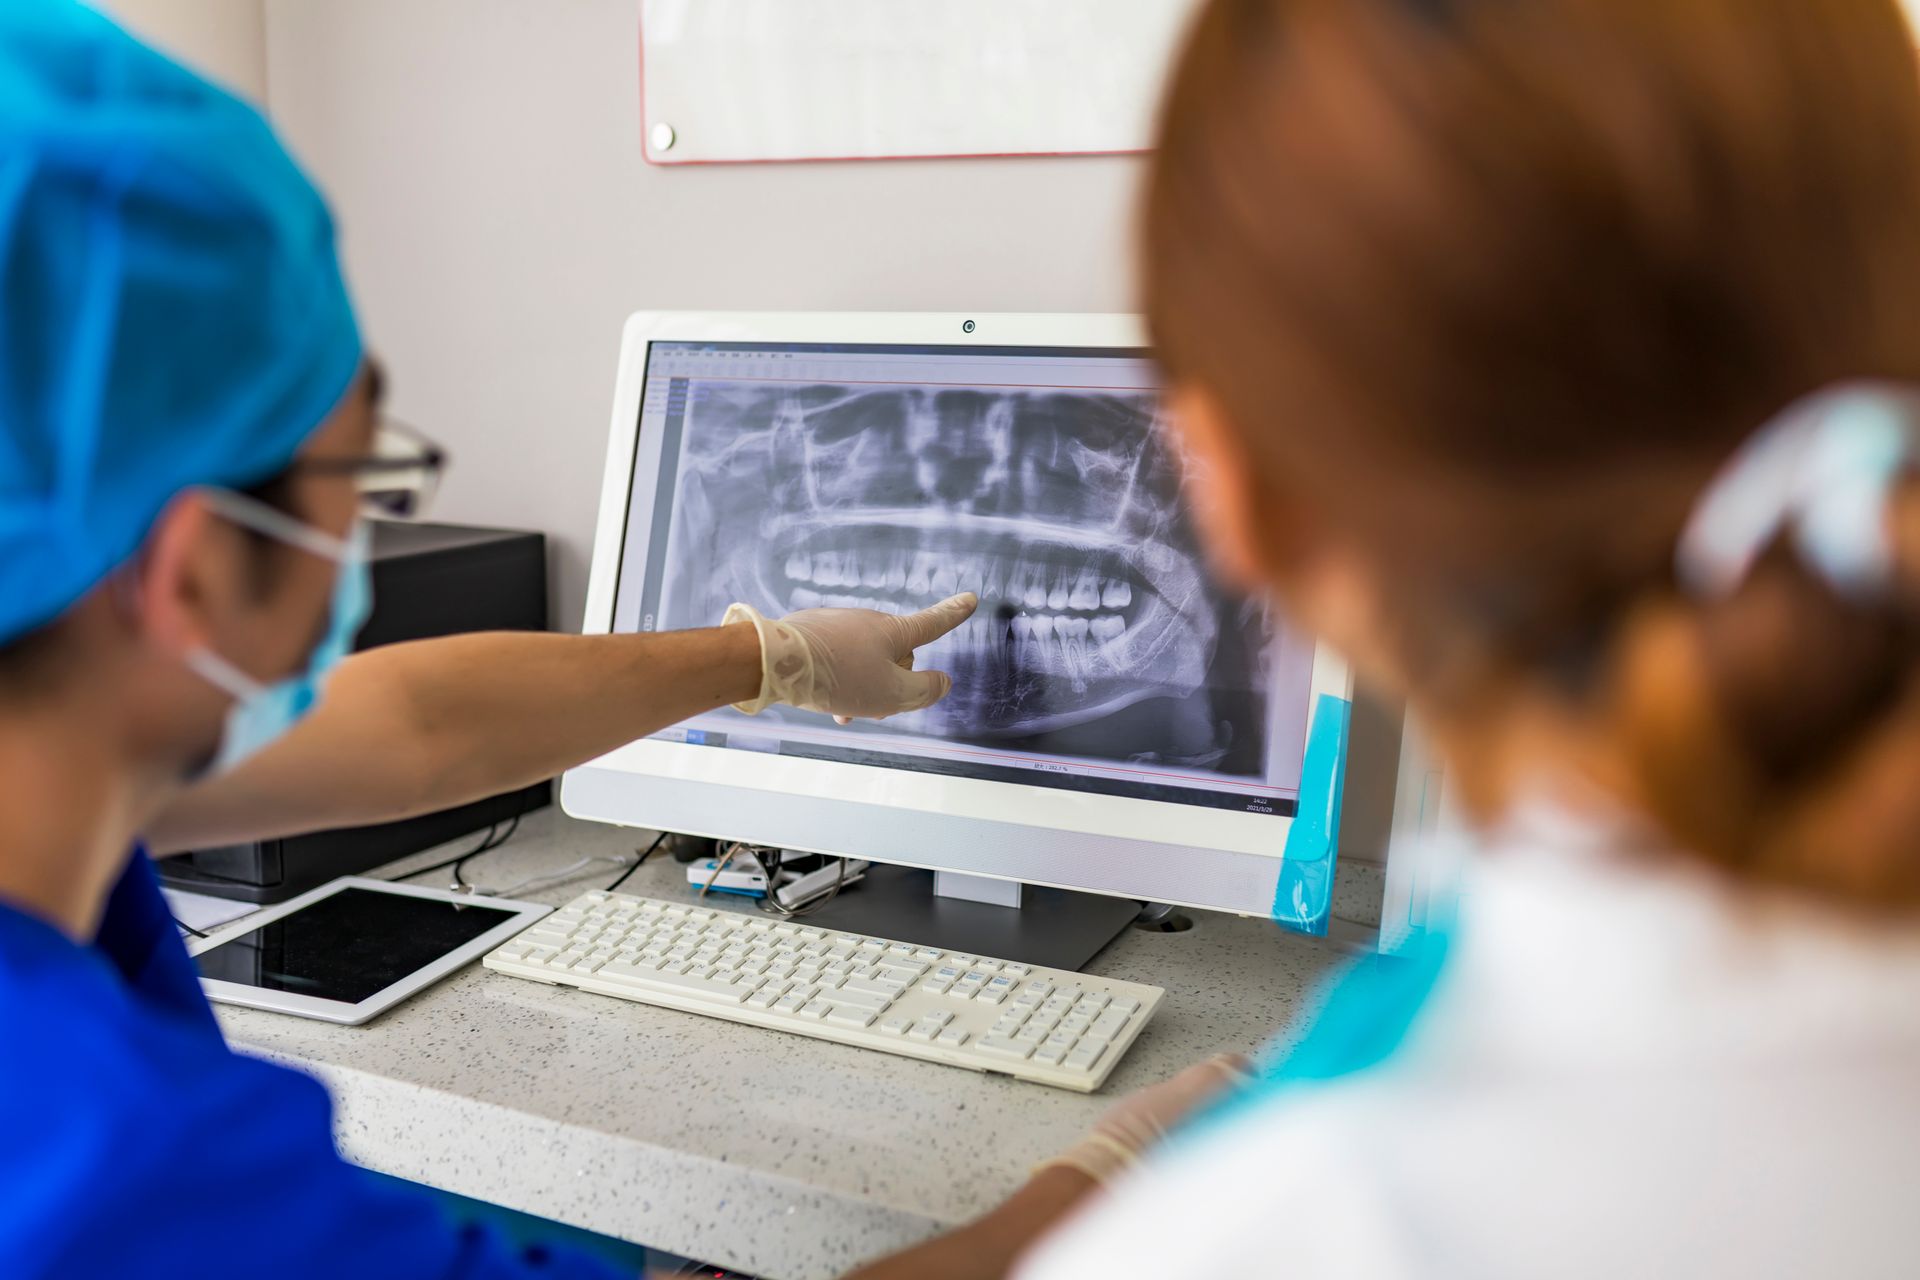 Dentist shows the patient an x-ray image at display.